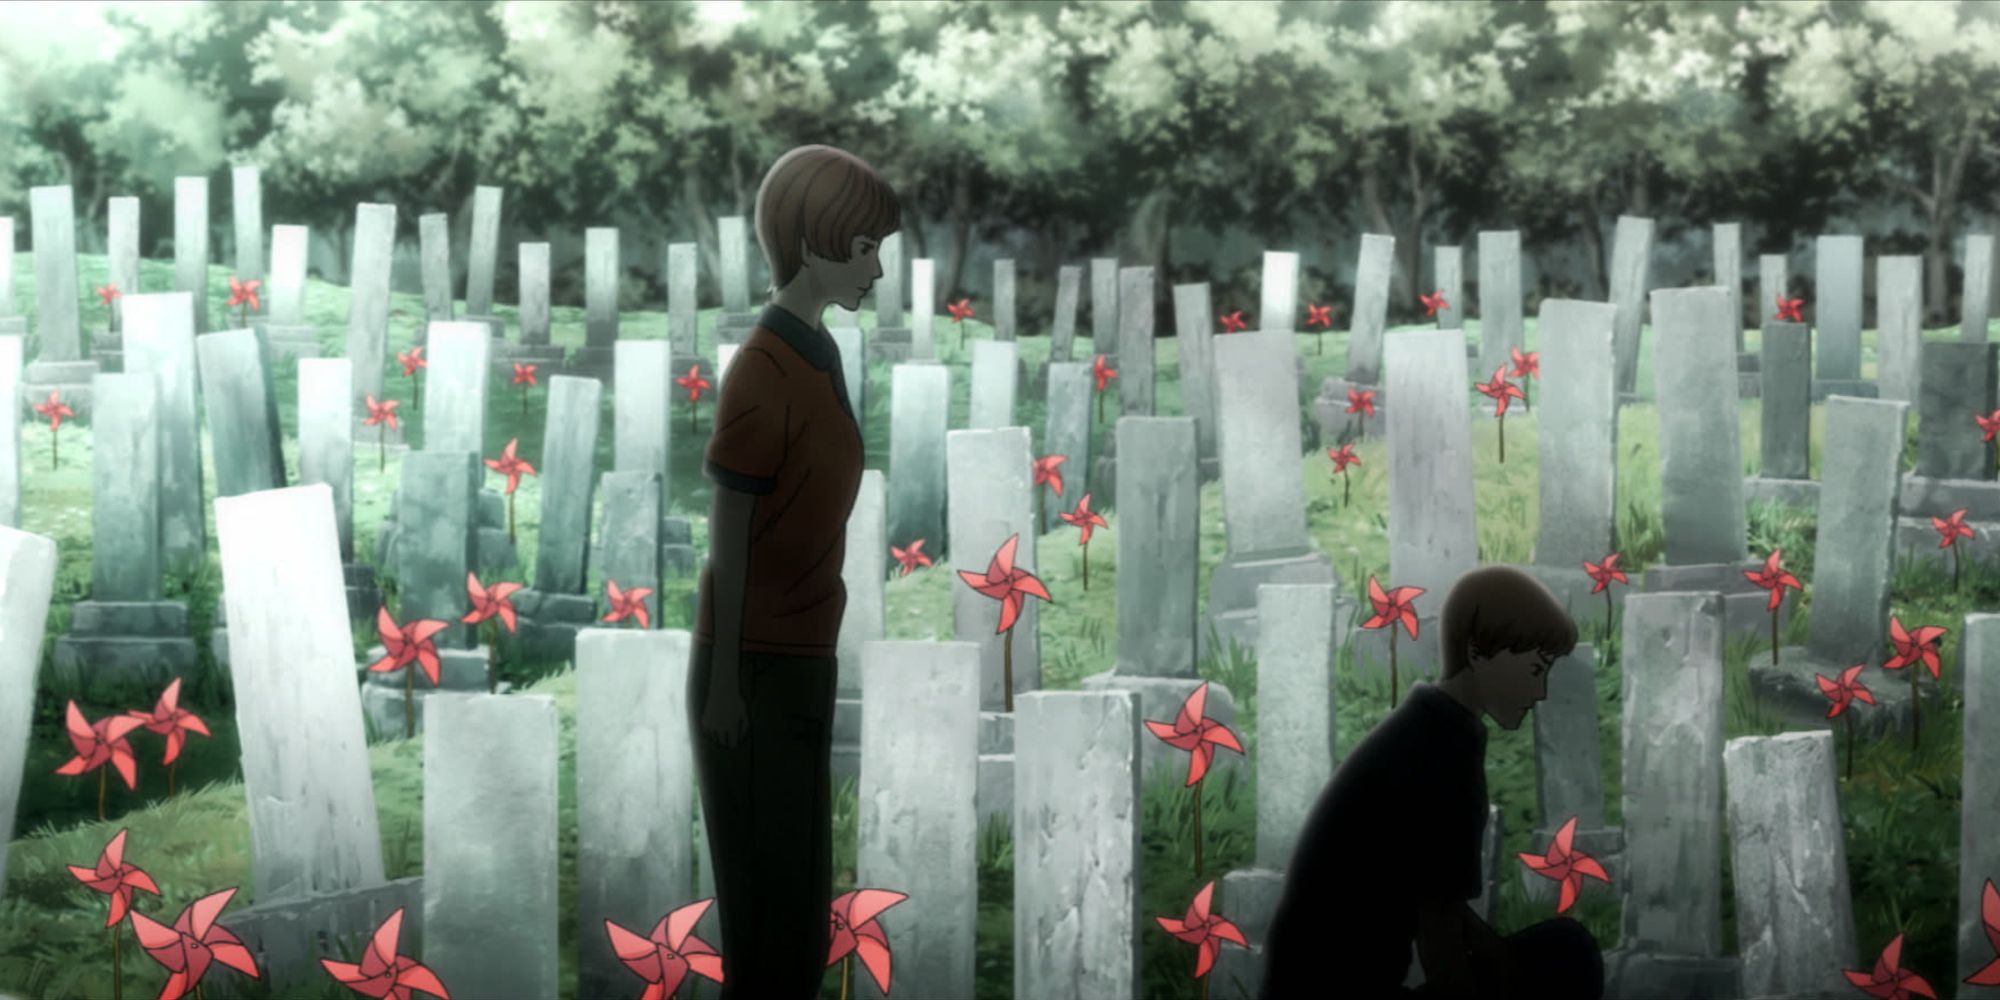 Anime - darkly lit figures sit in front of a graveyard